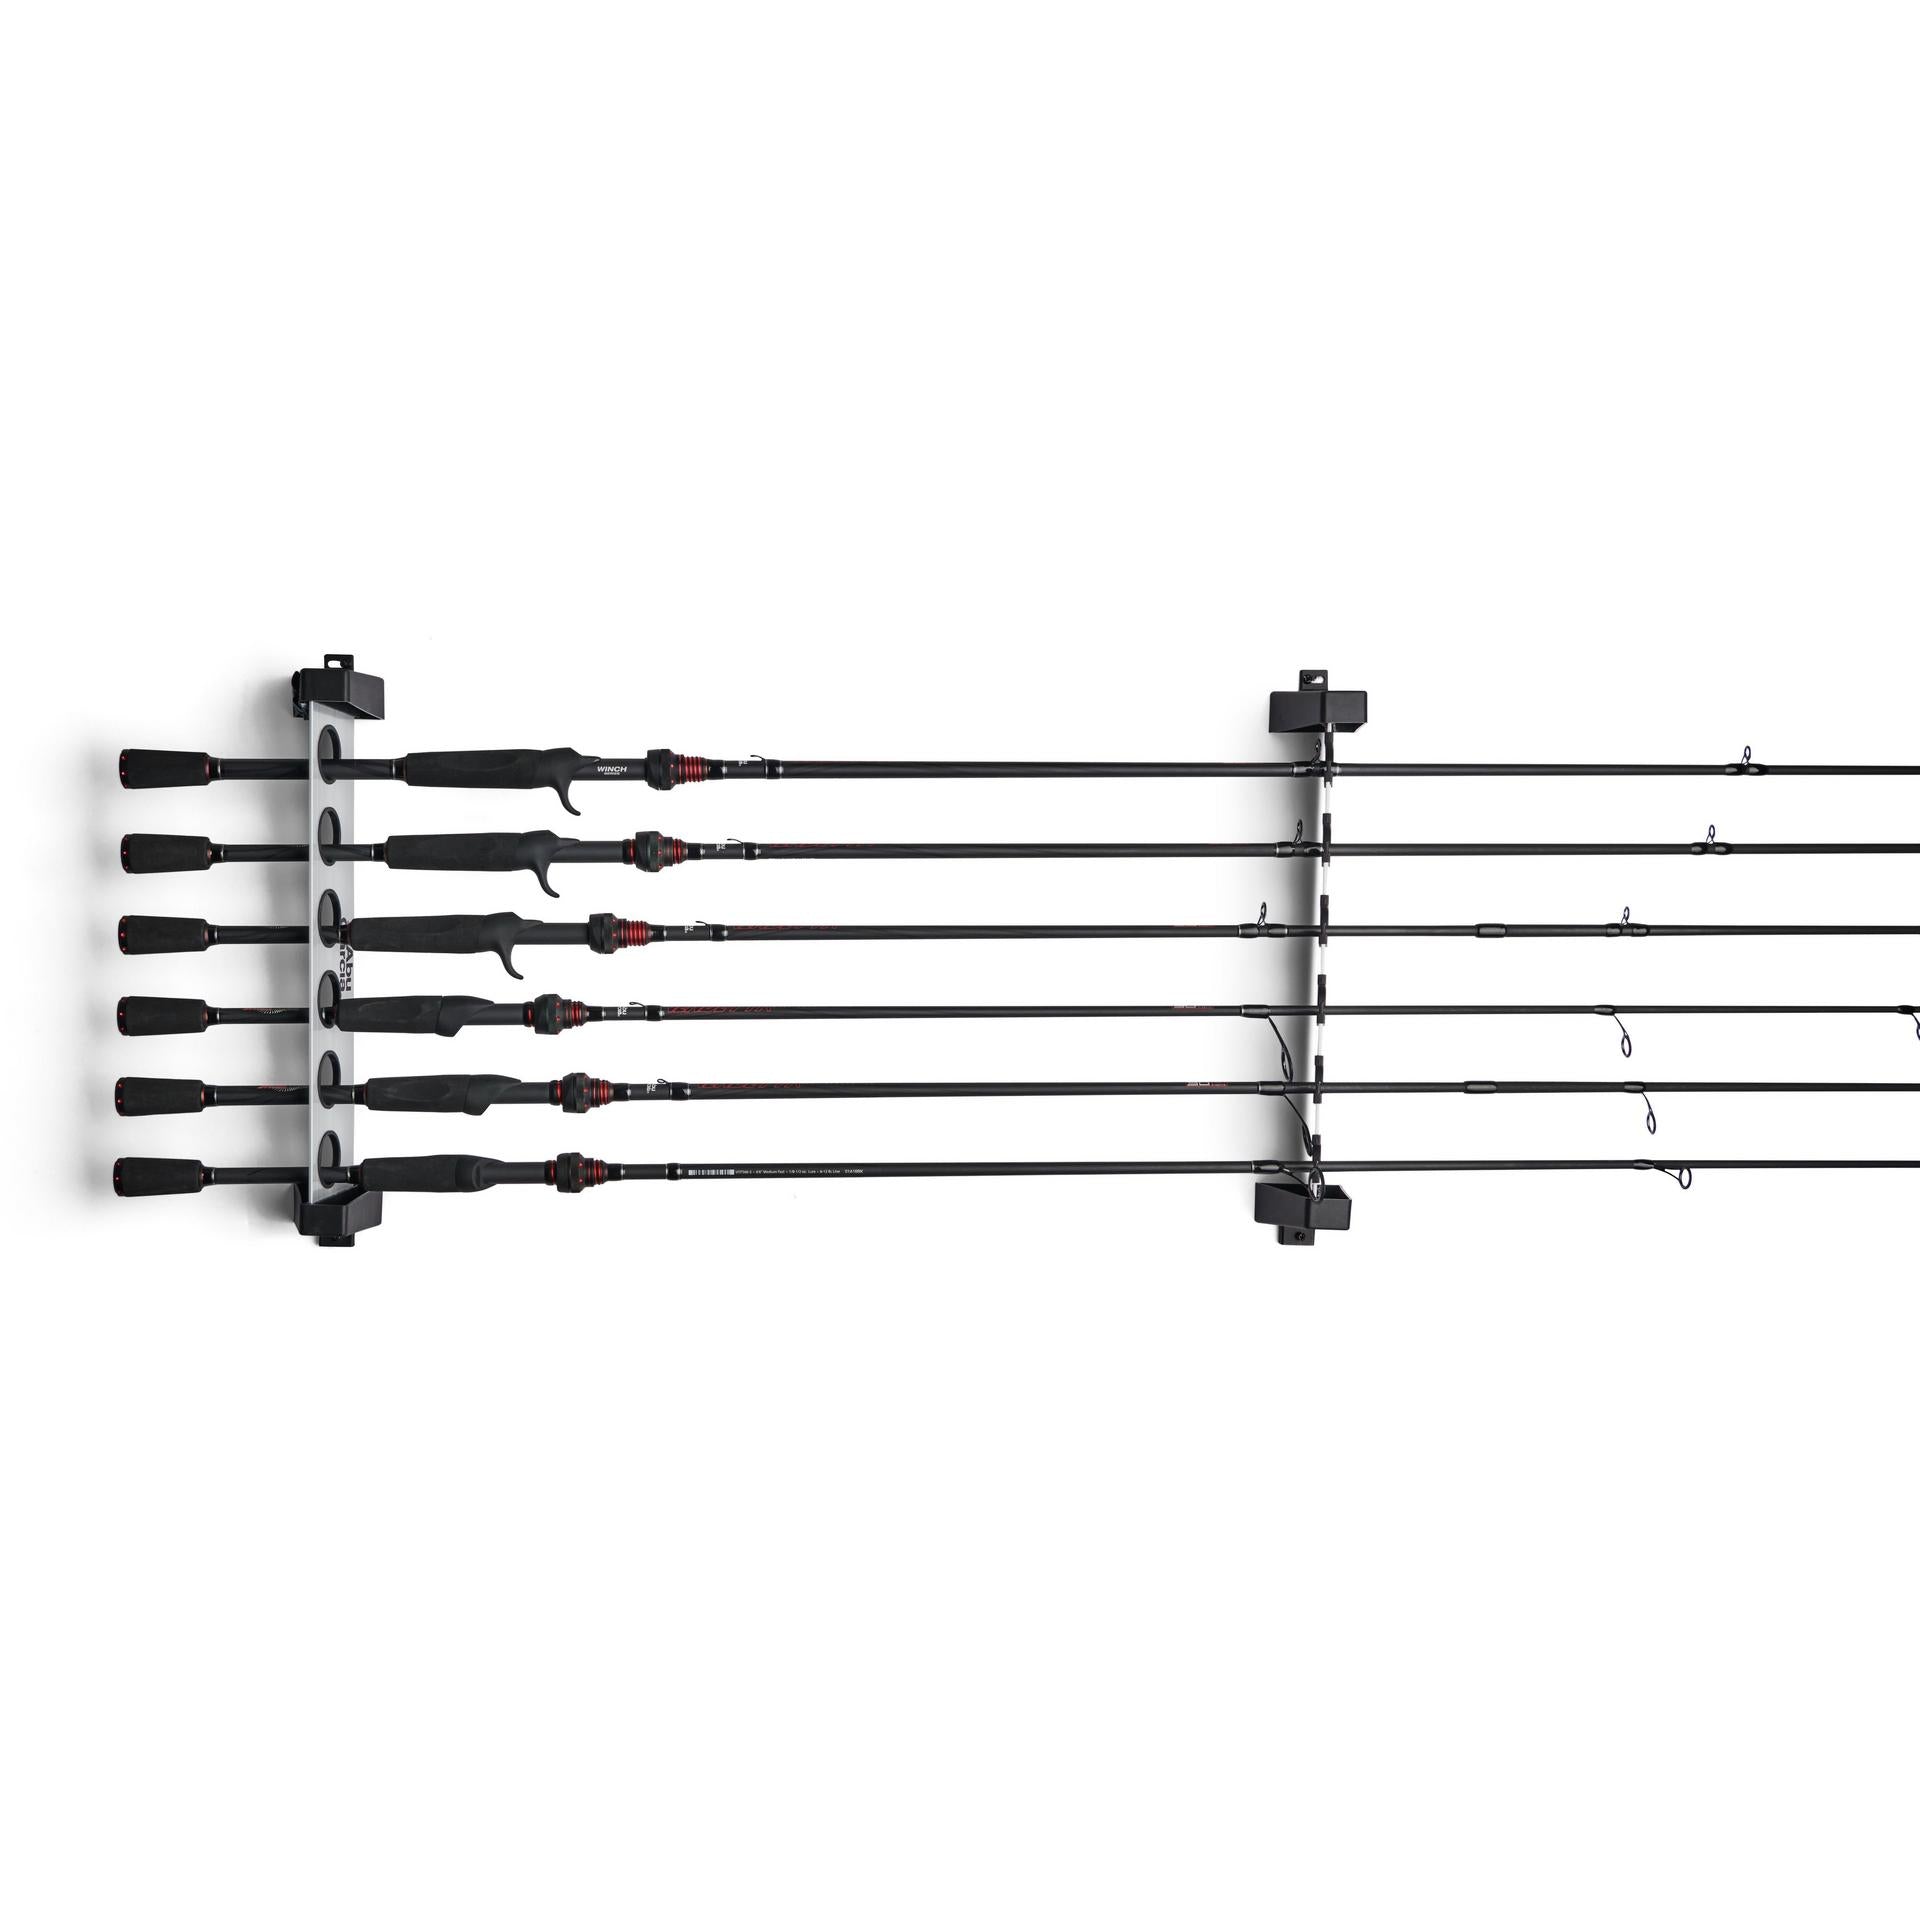 Eyotto Fishing Rod Rack Vertical Holder Horizontal Wall Mount Boat Pole Stand Storages, Size: 6 Fishing Rods, Black